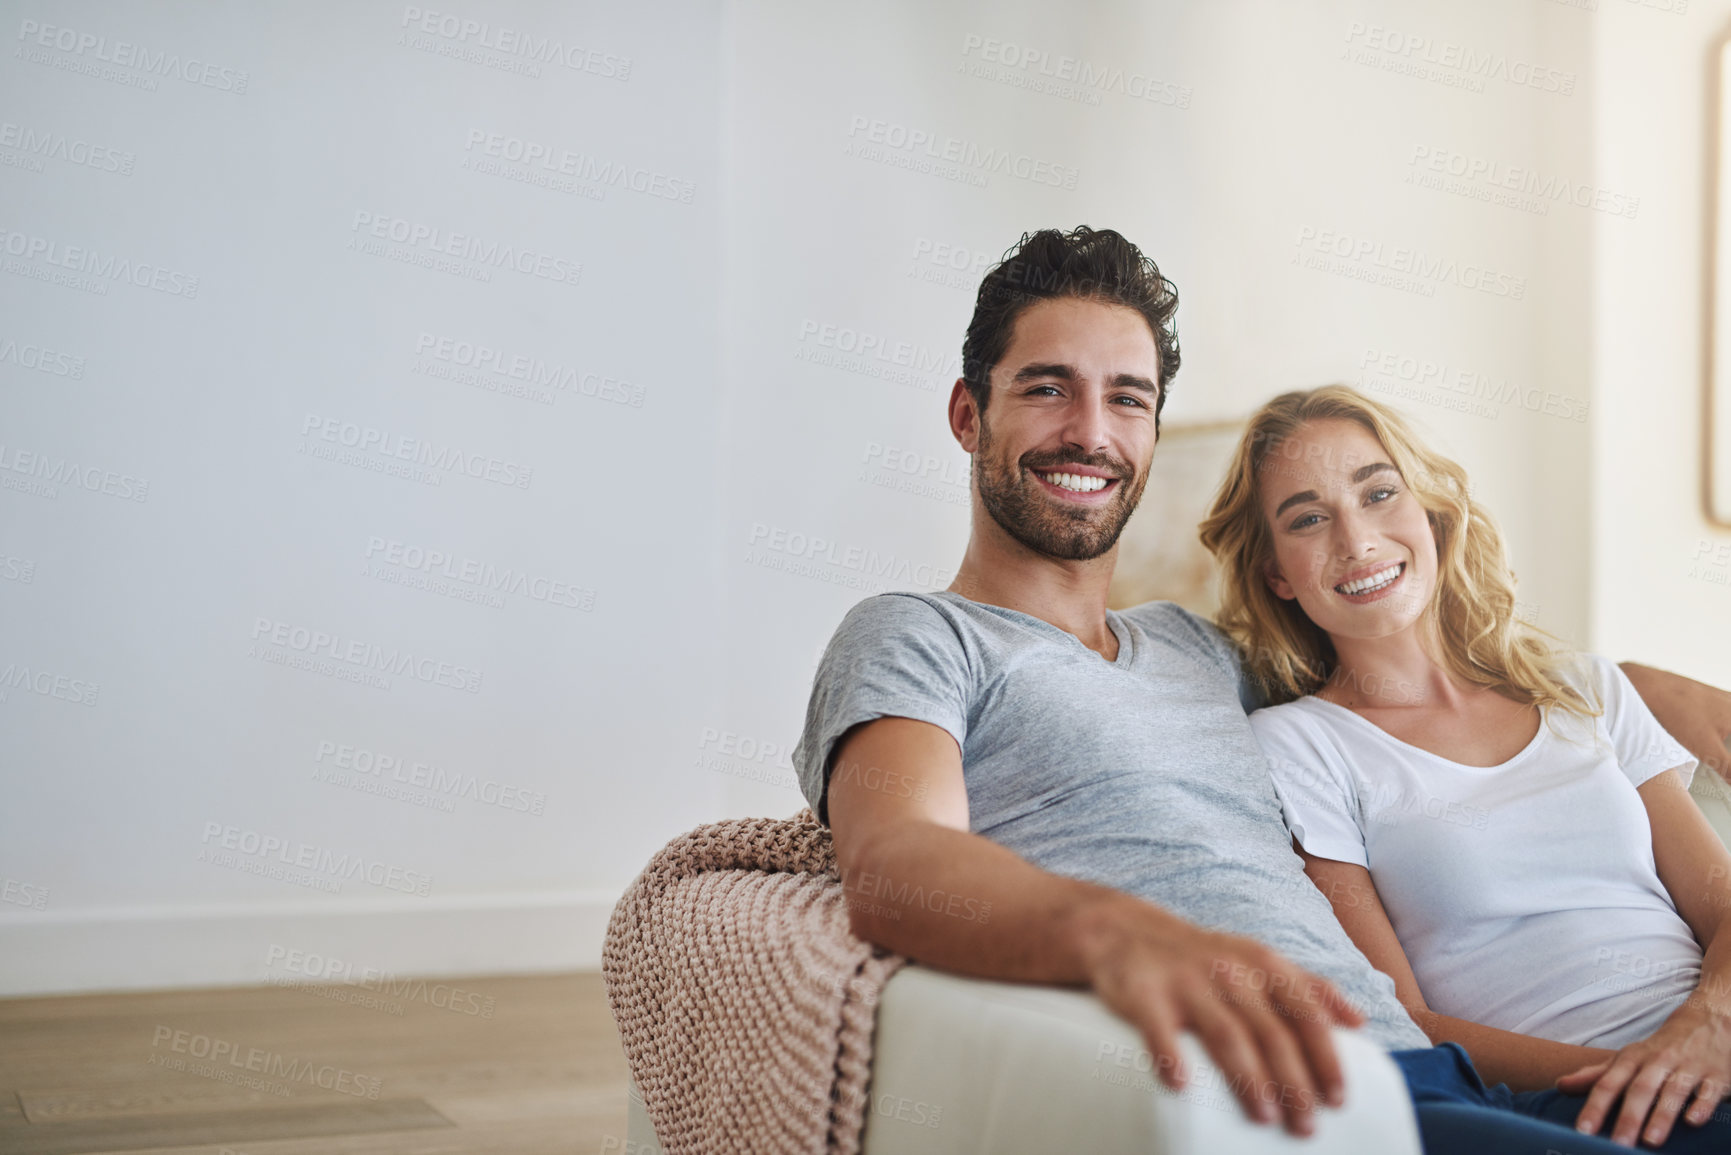 Buy stock photo Smile, portrait or happy couple in home with trust, commitment or loyalty together bonding or smiling. Wellness, lovers or woman enjoys quality time with a romantic man on holiday weekend break  